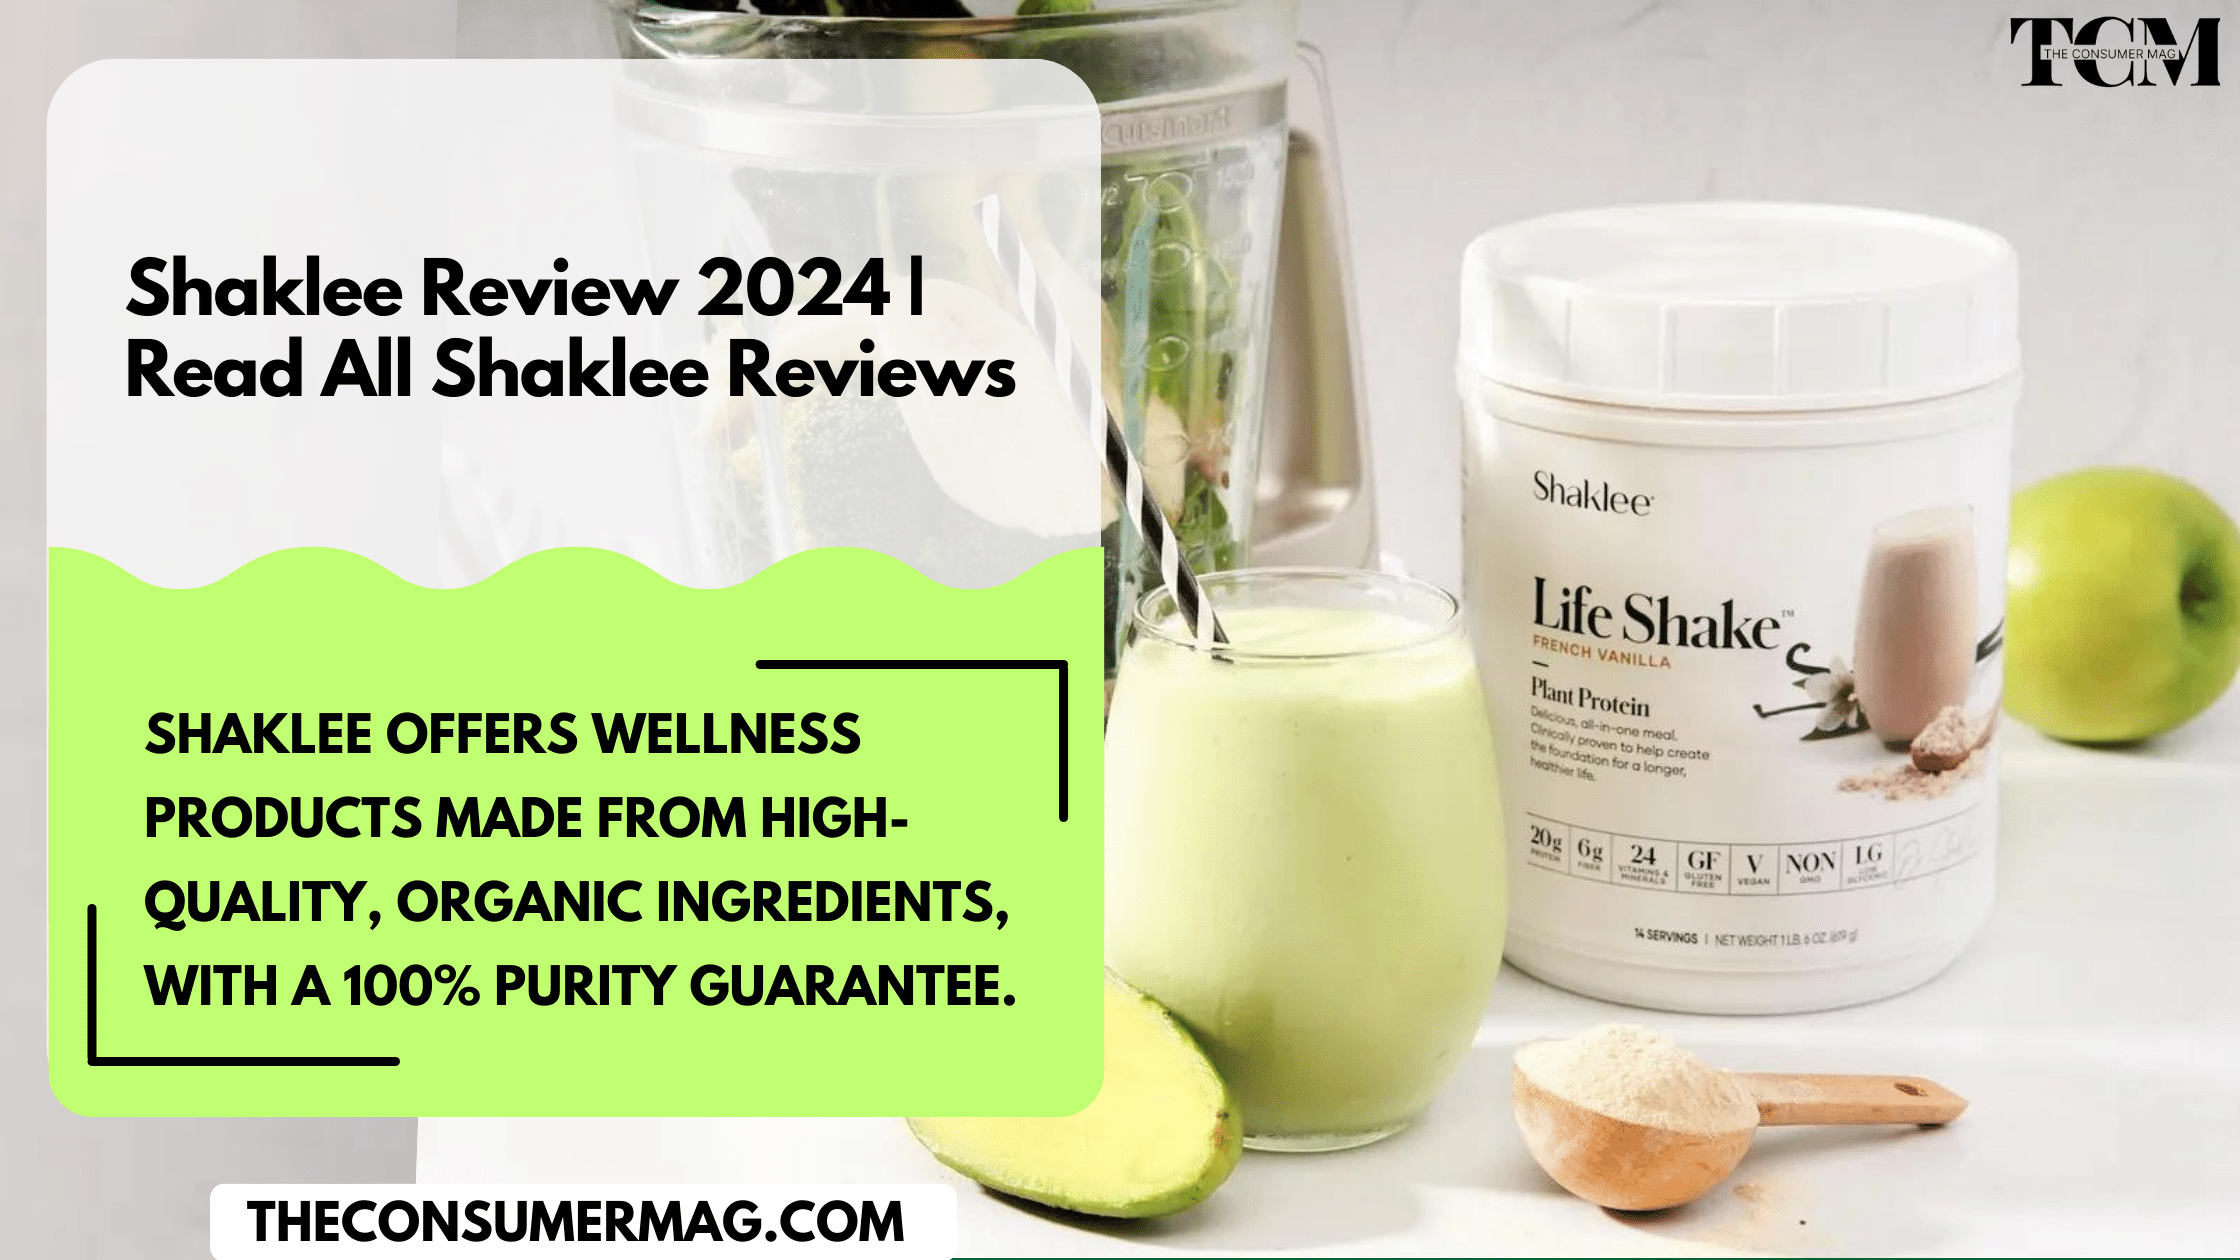 Shaklee Review 2024 | Read All Shaklee Reviews